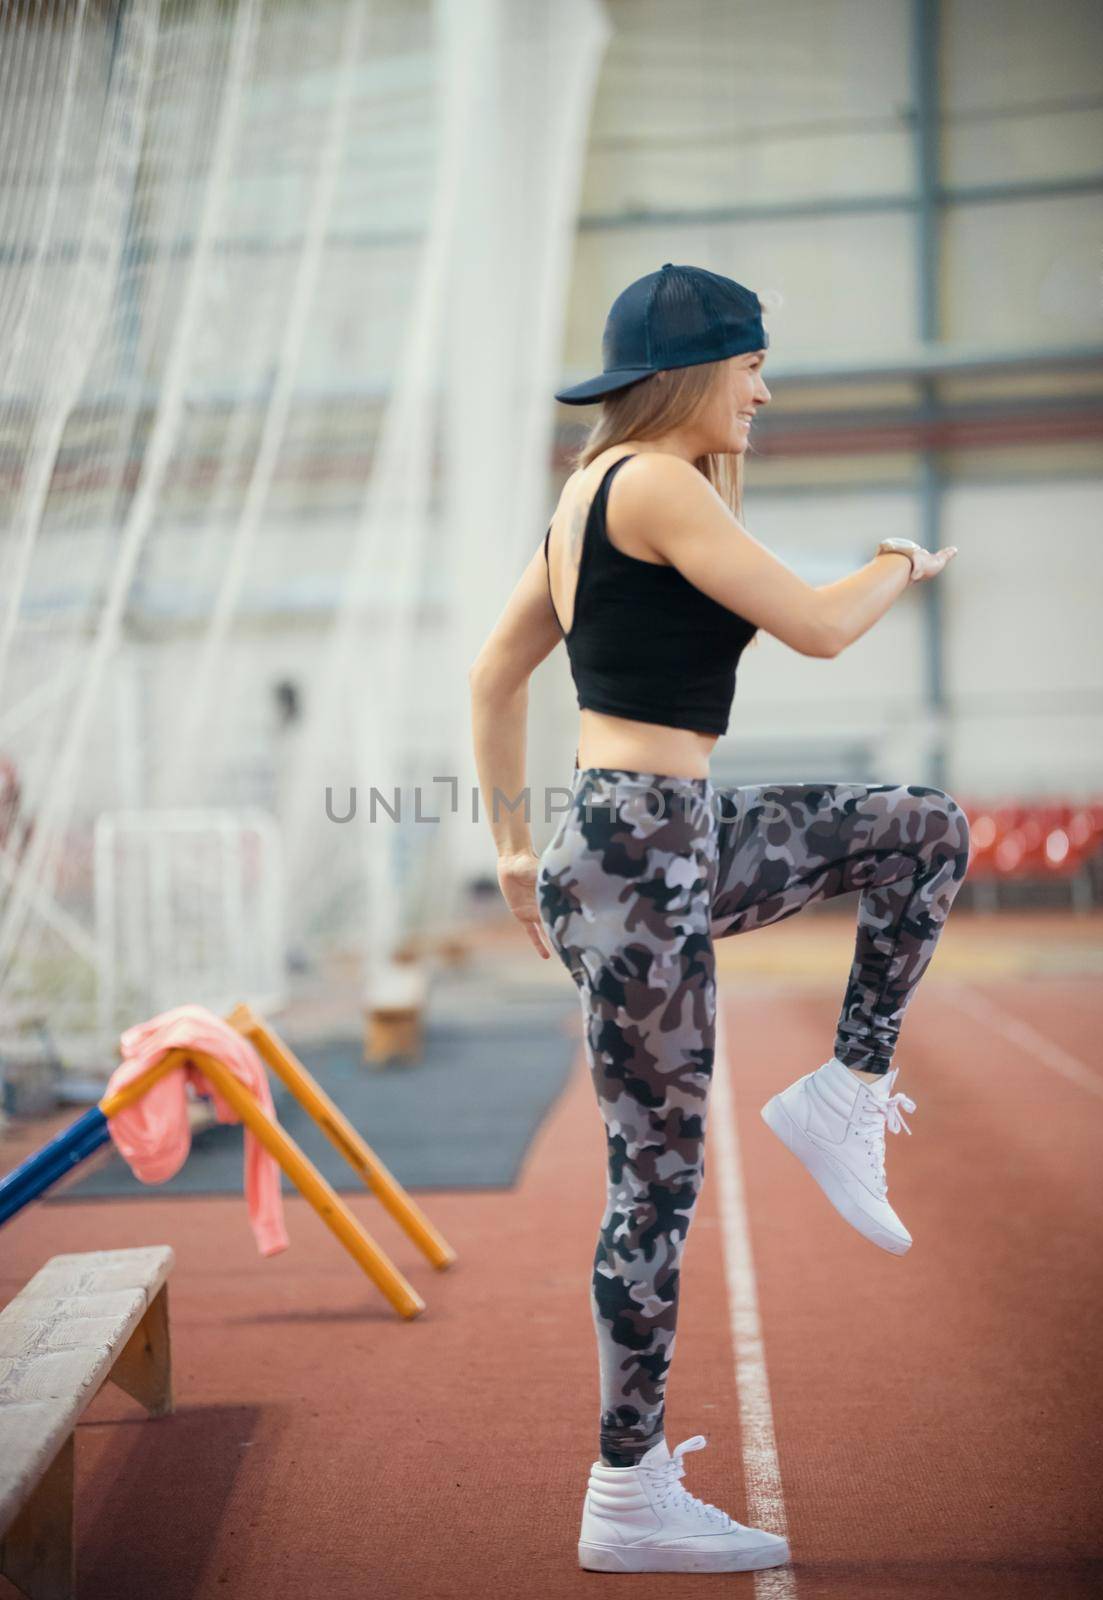 Young athletic woman in leggings warming up her legs. Mid shot